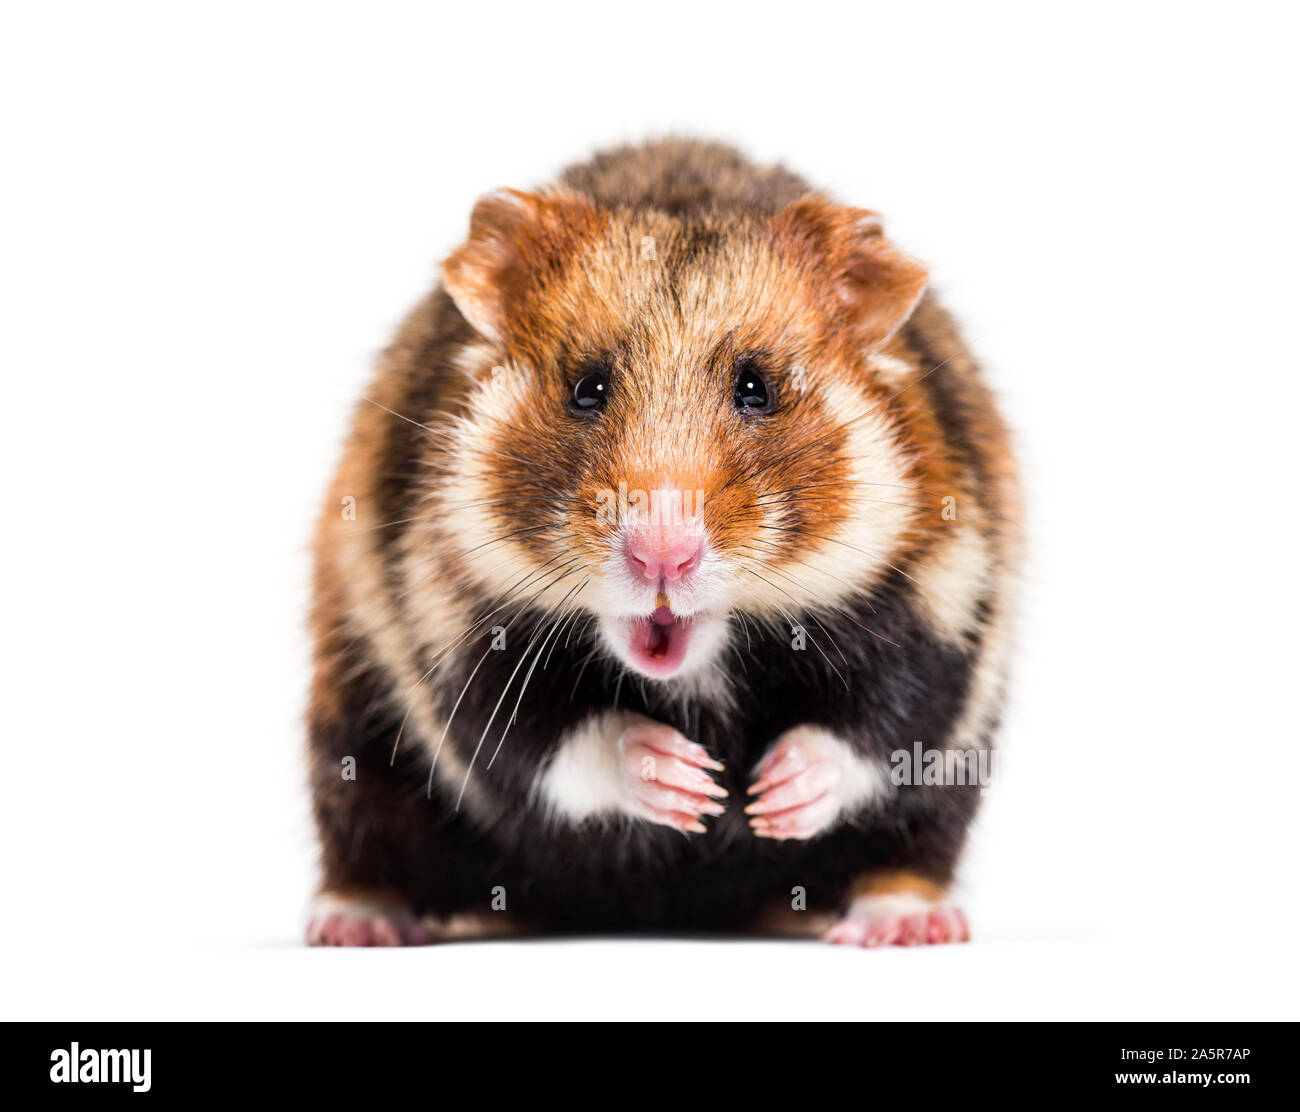 Grand hamster Cricetus cricetus, in front of white background Banque D'Images